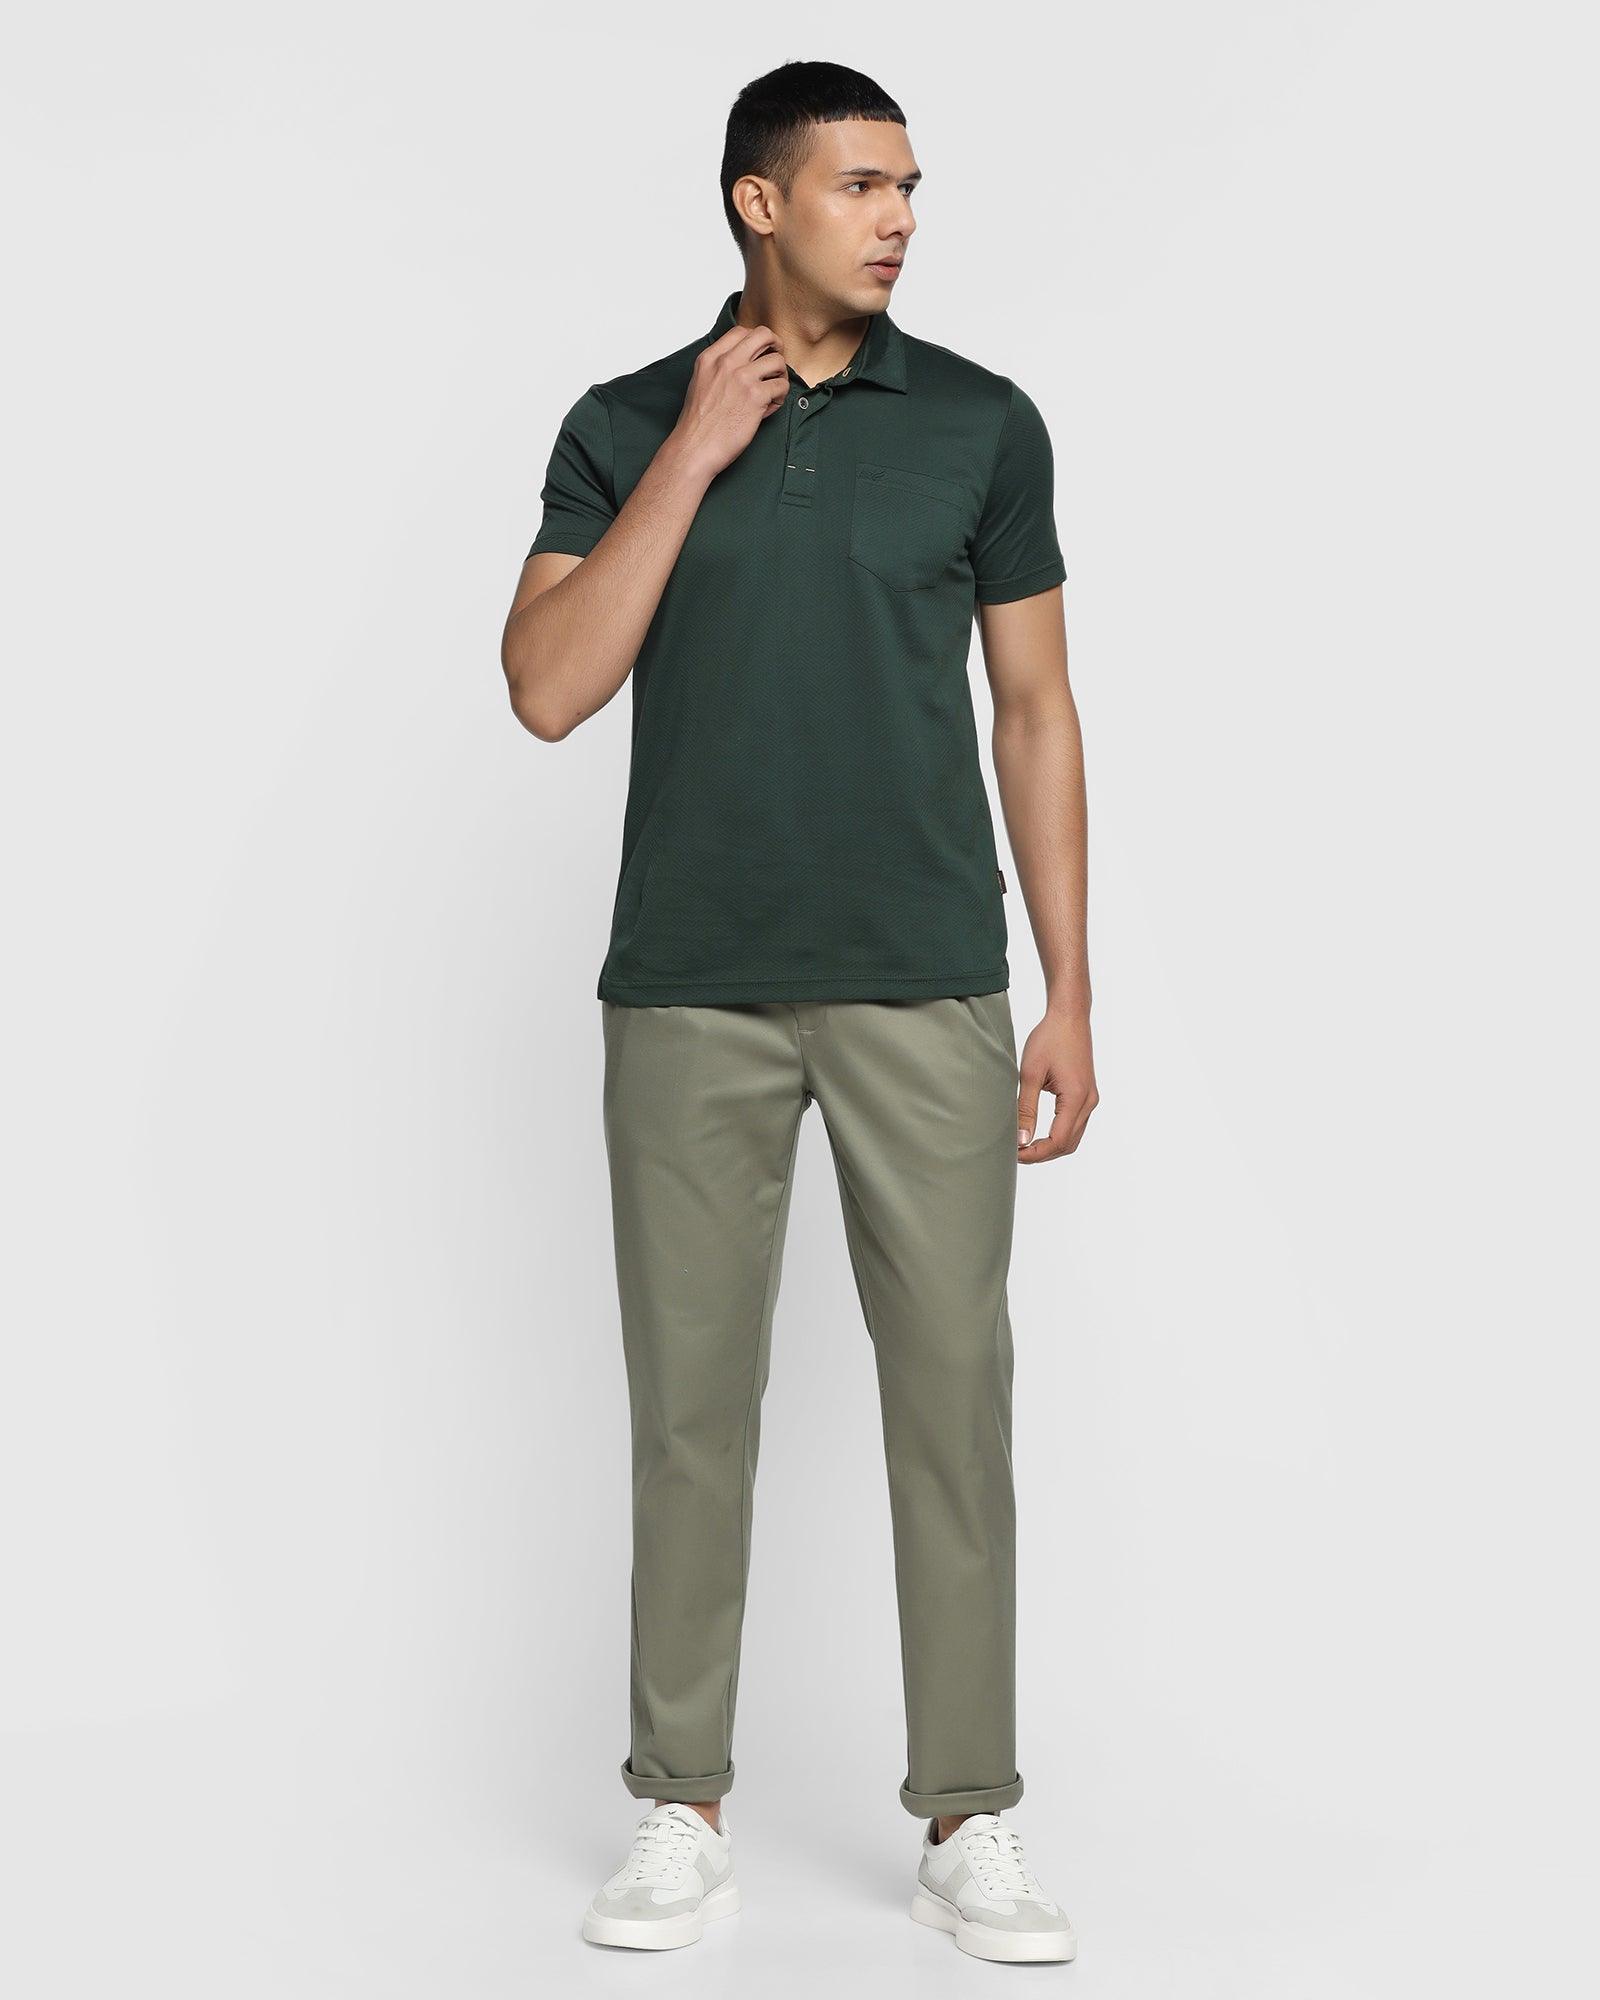 Nxt Casual Olive Solid Khakis - Cygnus Pl